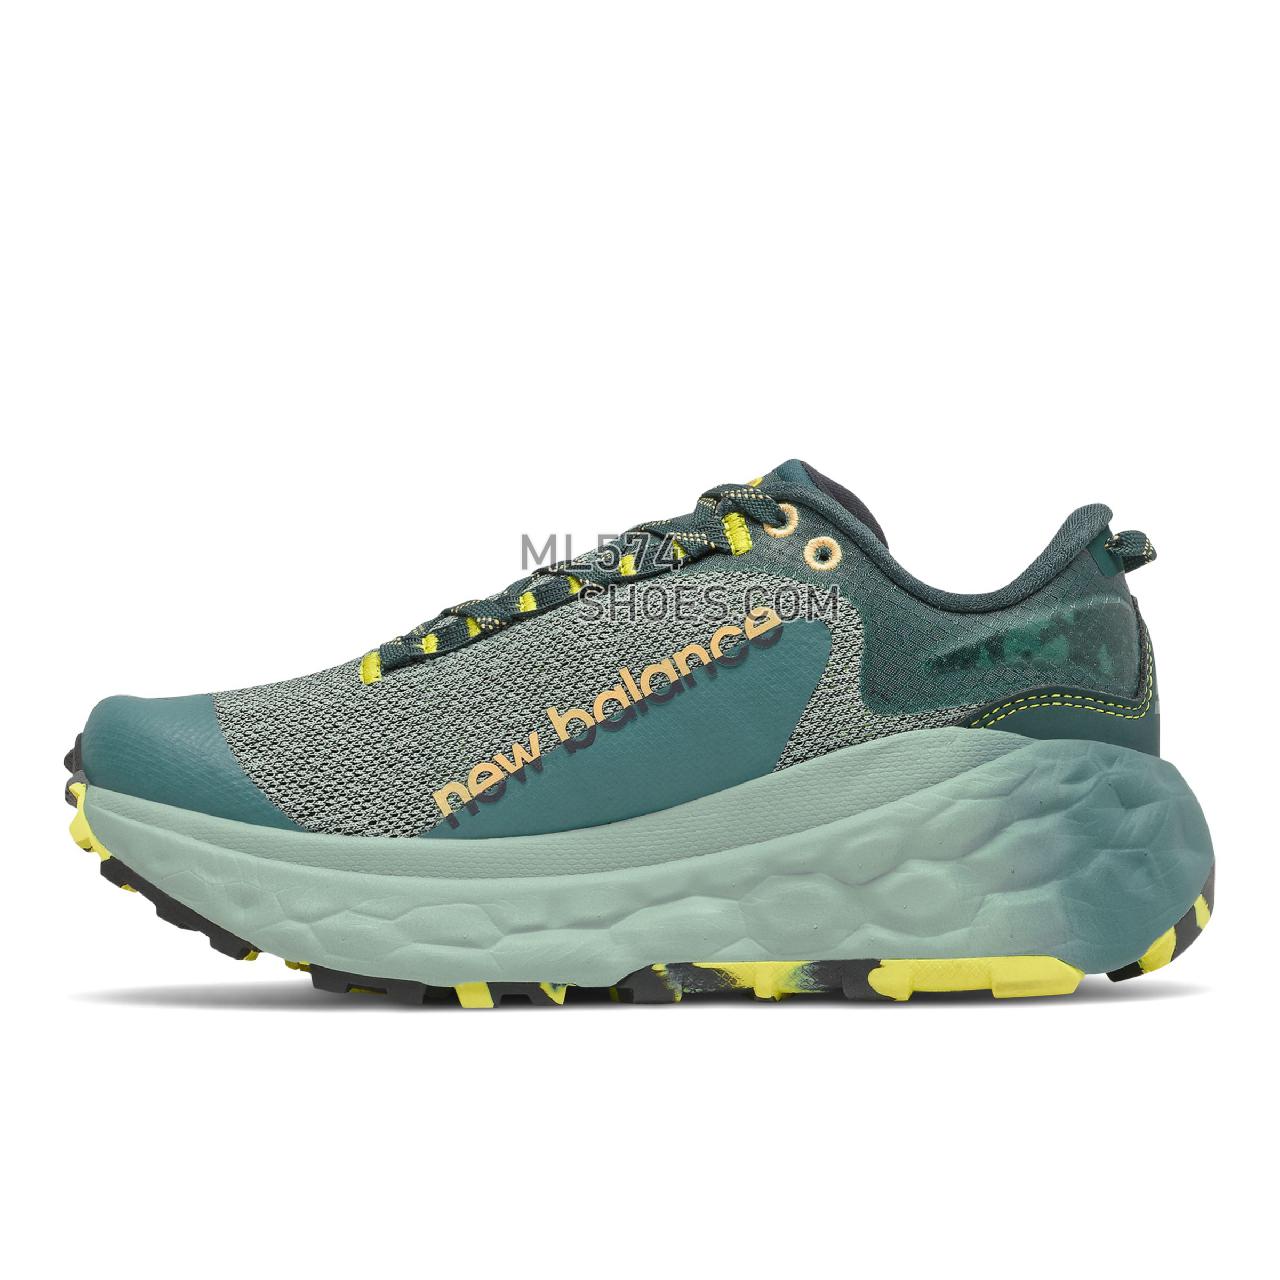 New Balance Fresh Foam X More Trail v2 - Women's Fuelcell Sleek And LightWeight - Deep Sea with Sulpher Yellow - WTMORLT2